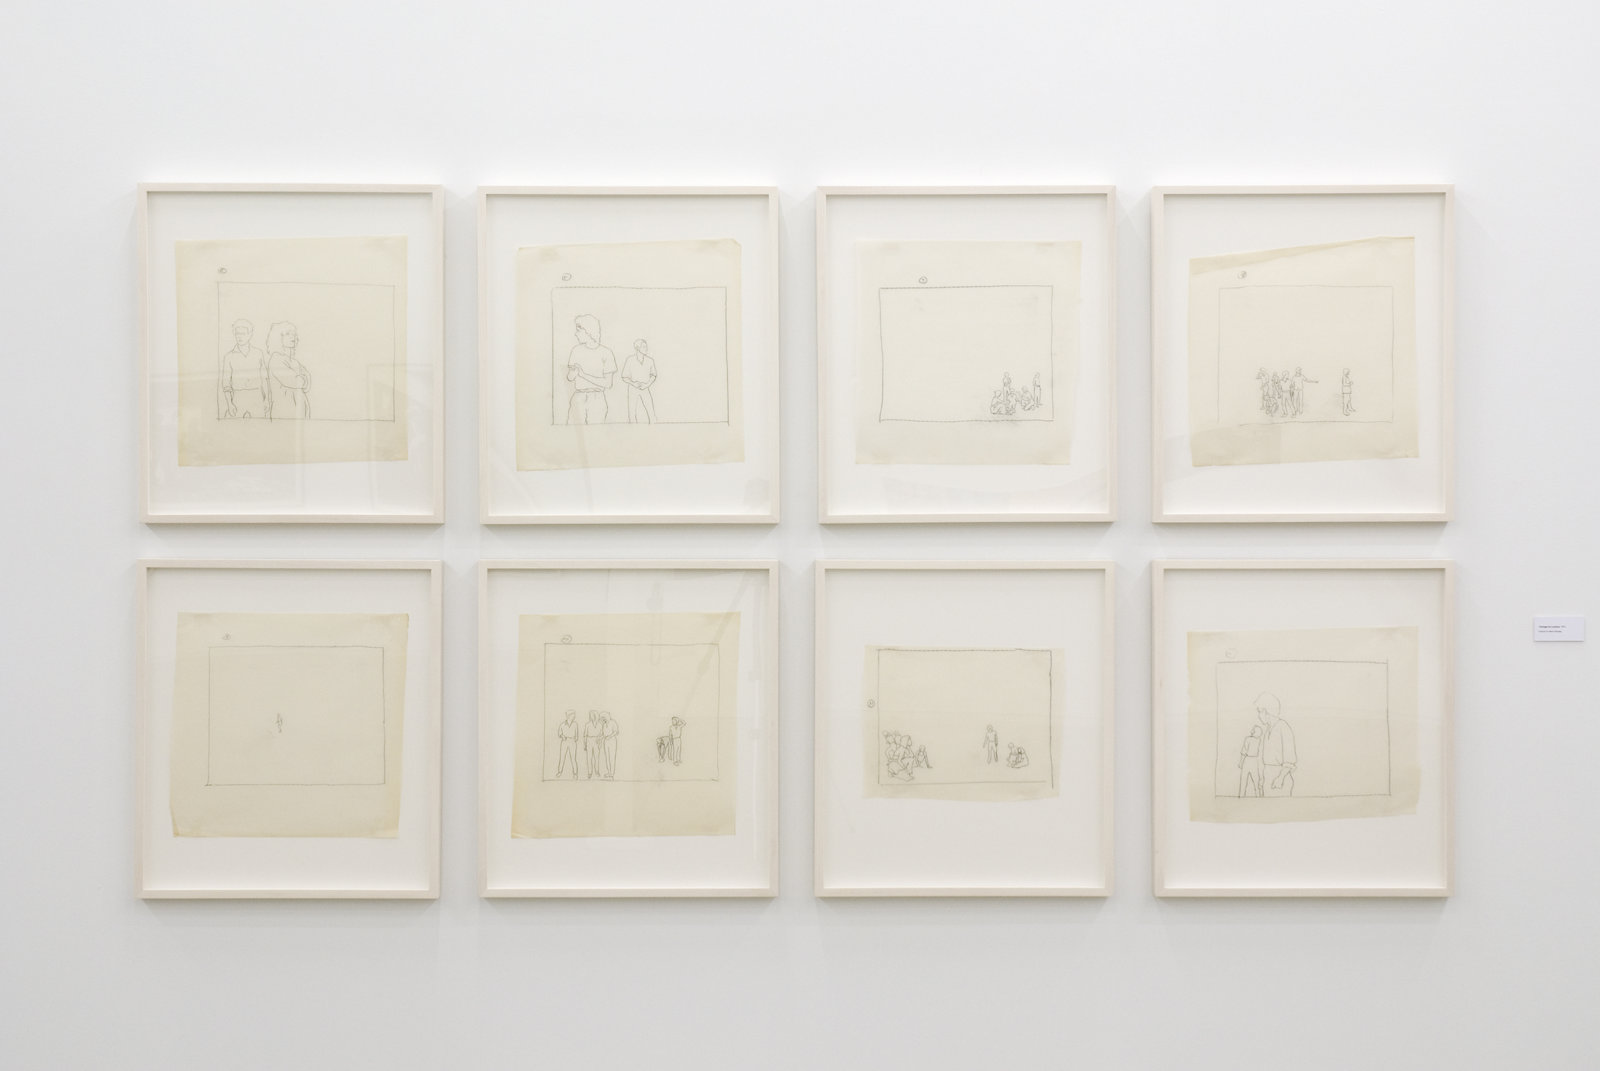 Ian Wallace, Tracings for Lookout, 1979, 8 pencil tracings on vellum, 27 x 24 in. (69 x 61 cm)